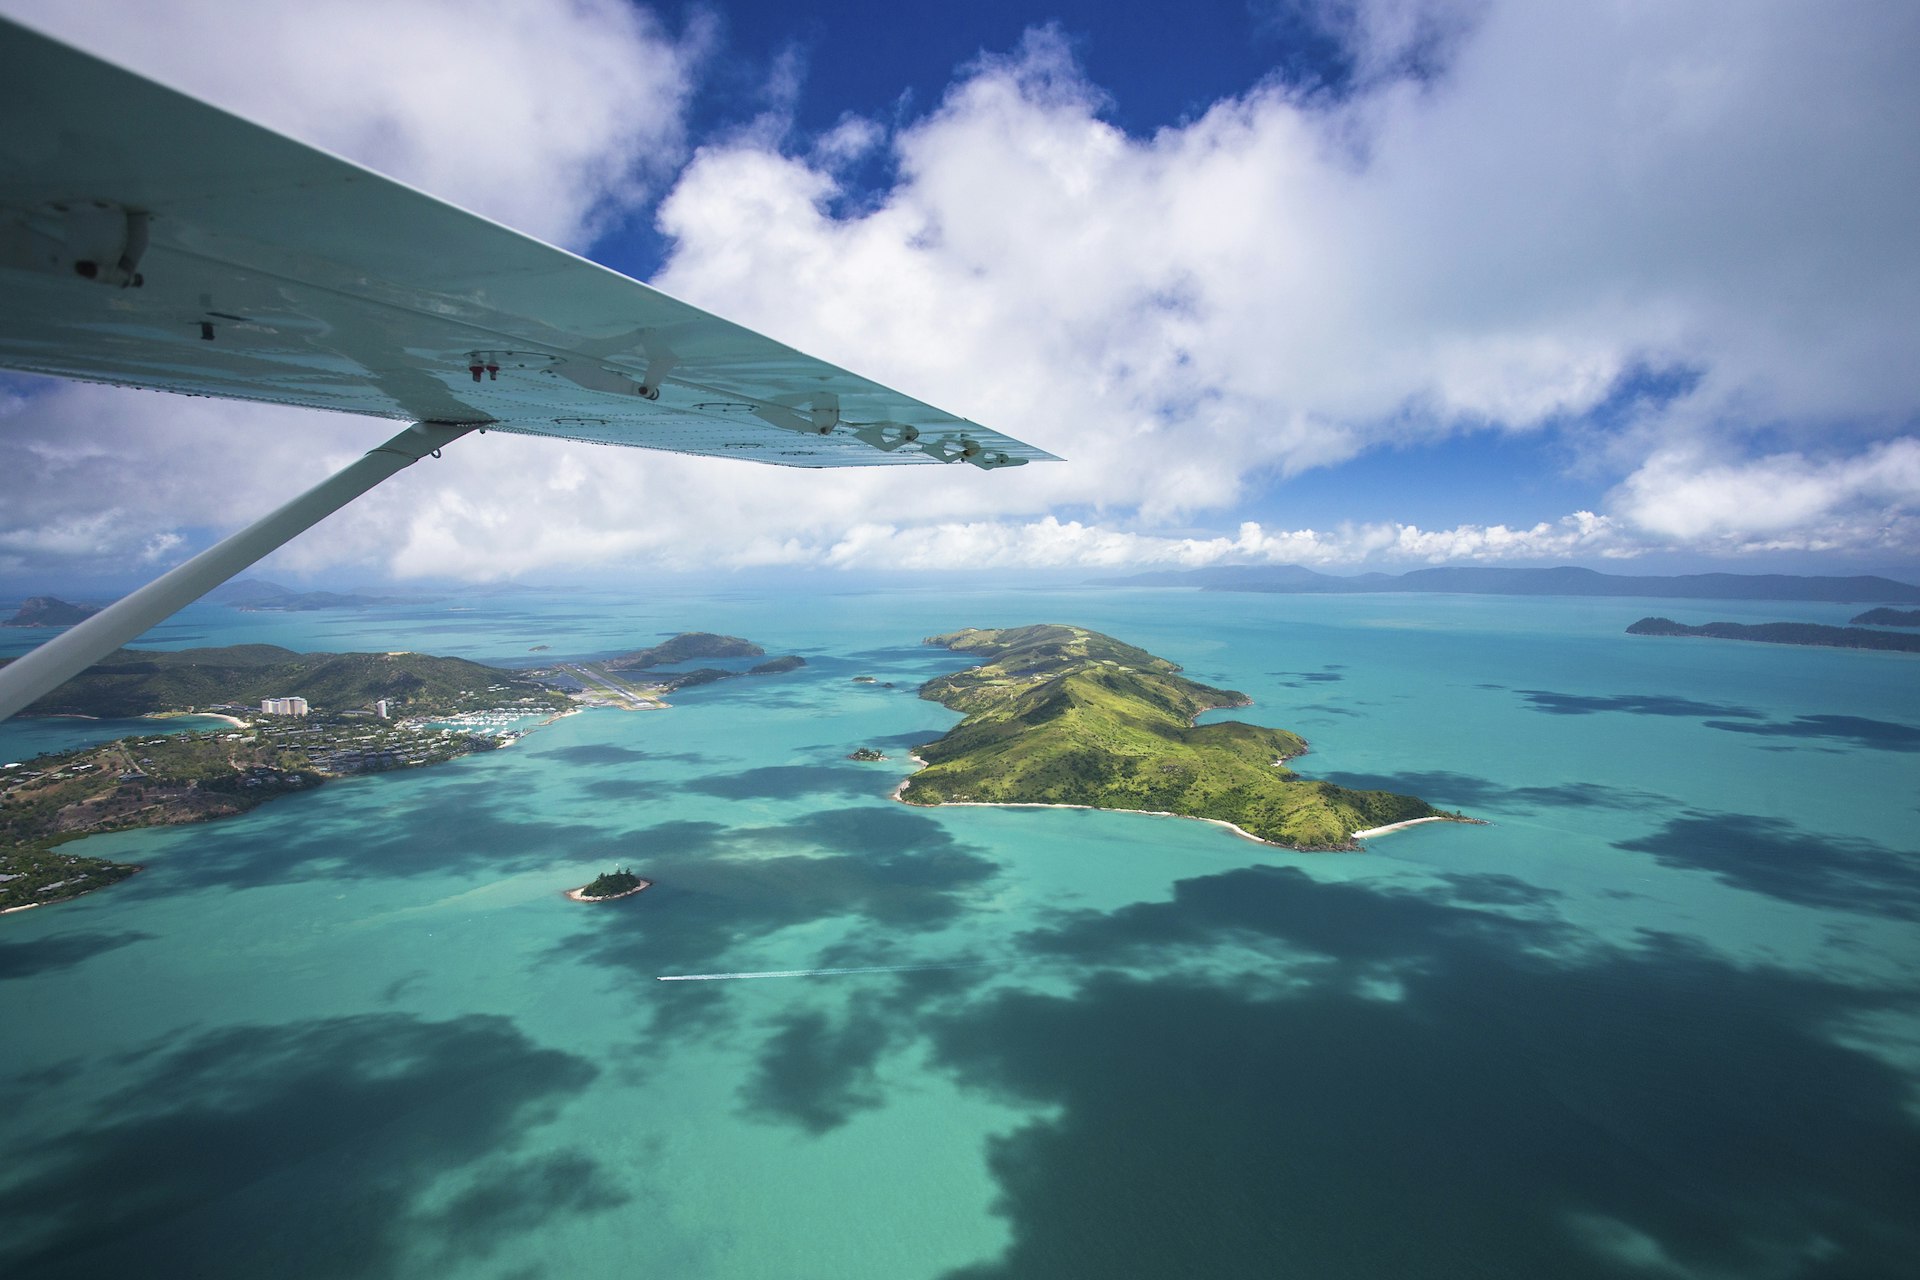 Aerial views over the Whitsunday Island chain. Hamilton Island is the most populated island in the group.